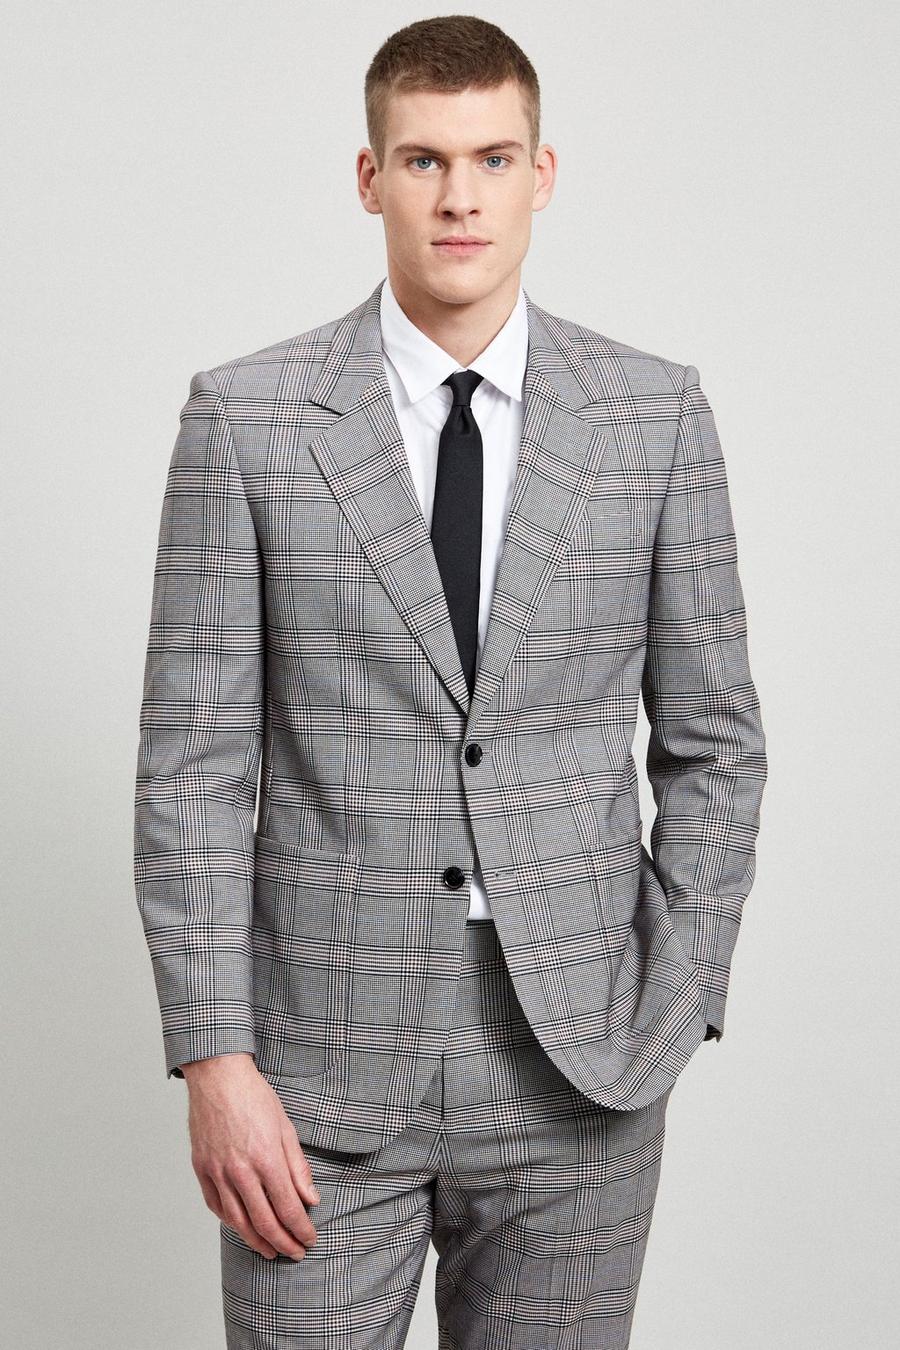  Relaxed Fit Grey Retro Check Suit Jacket